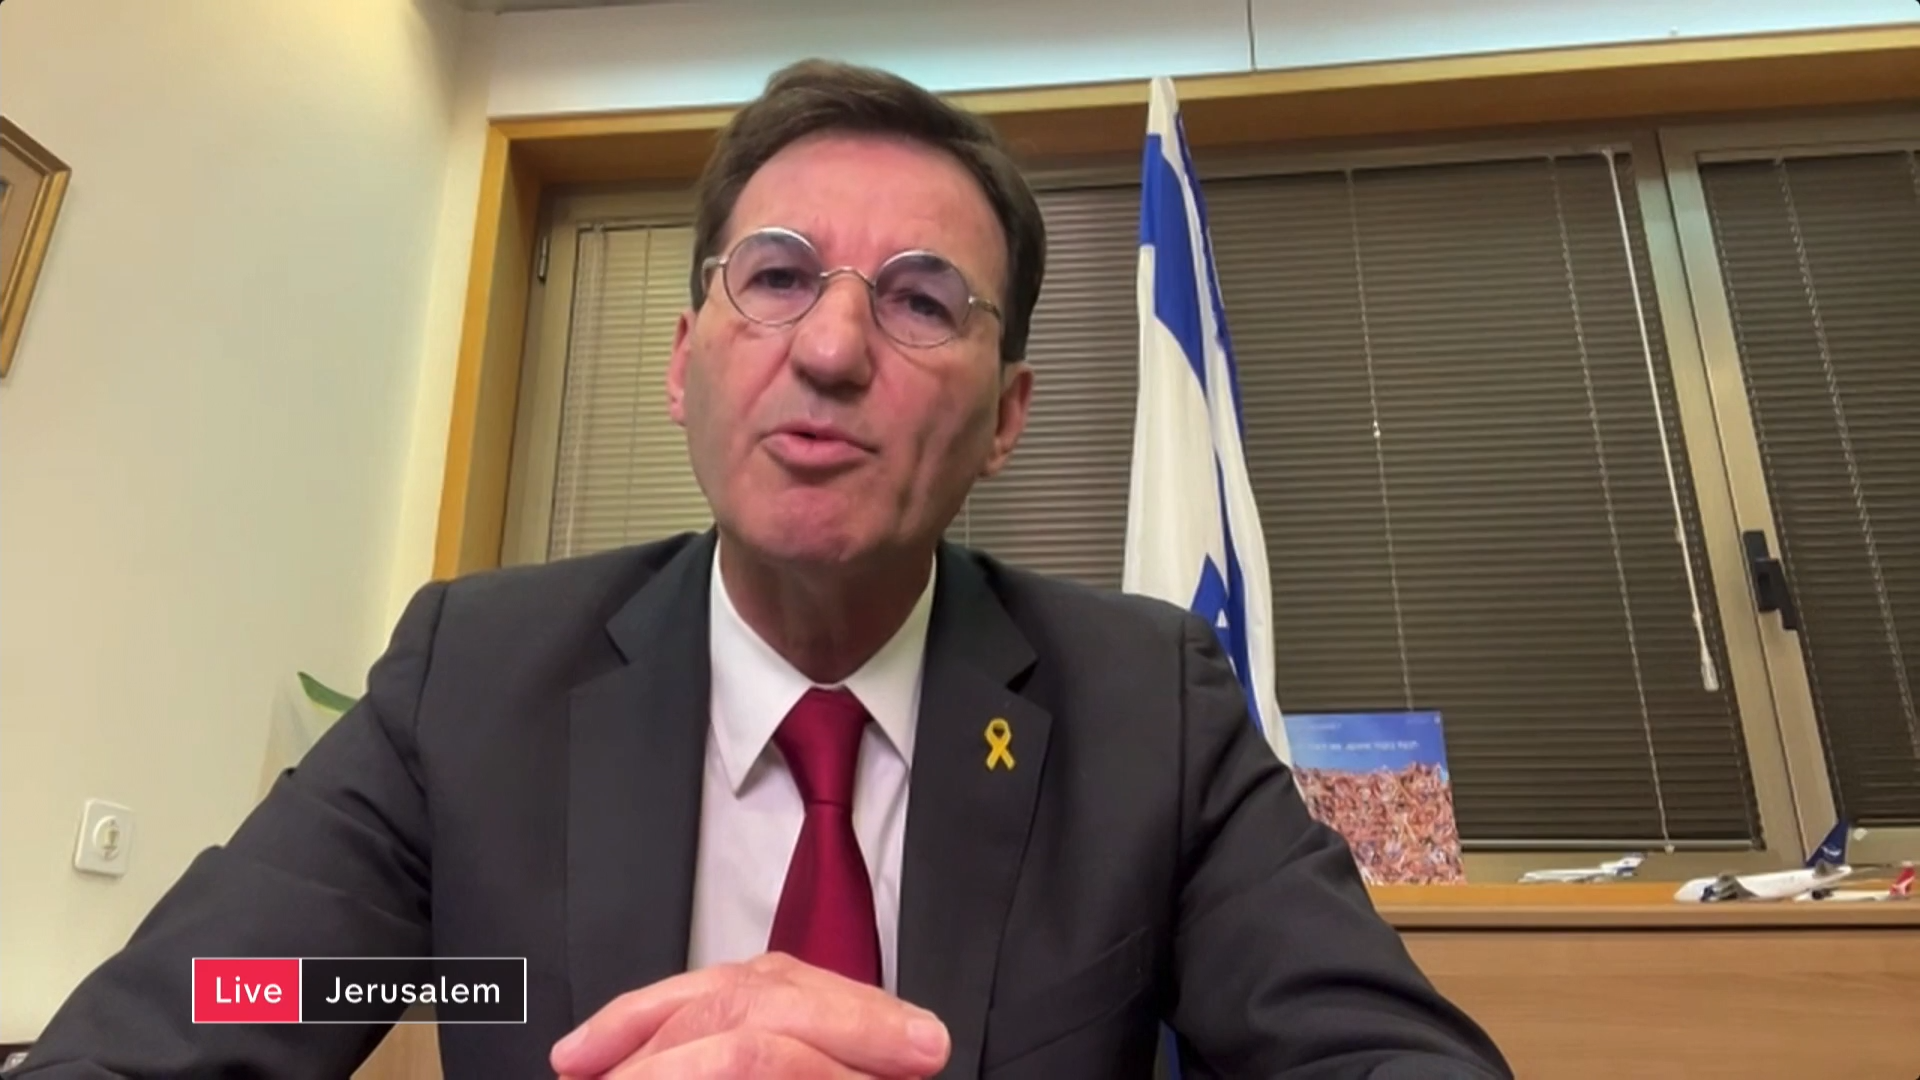 Israel respects humanitarian aid says member of Netenyahus party  Channel 4 News [Video]